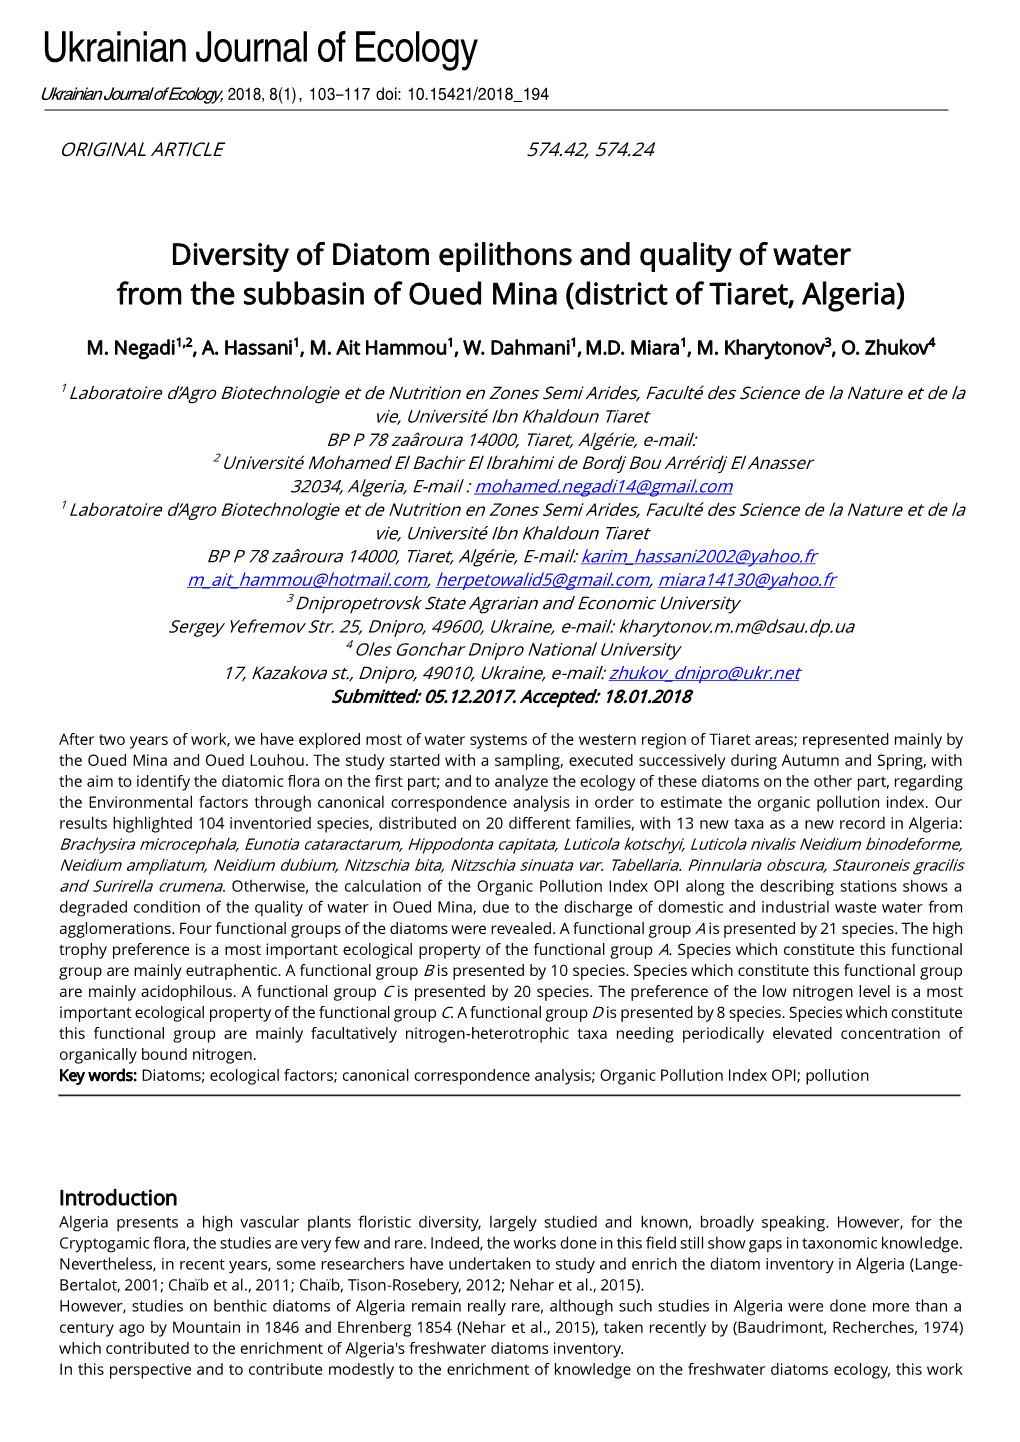 Diversity of Diatom Epilithons and Quality of Water from the Subbasin of Oued Mina (District of Tiaret, Algeria)